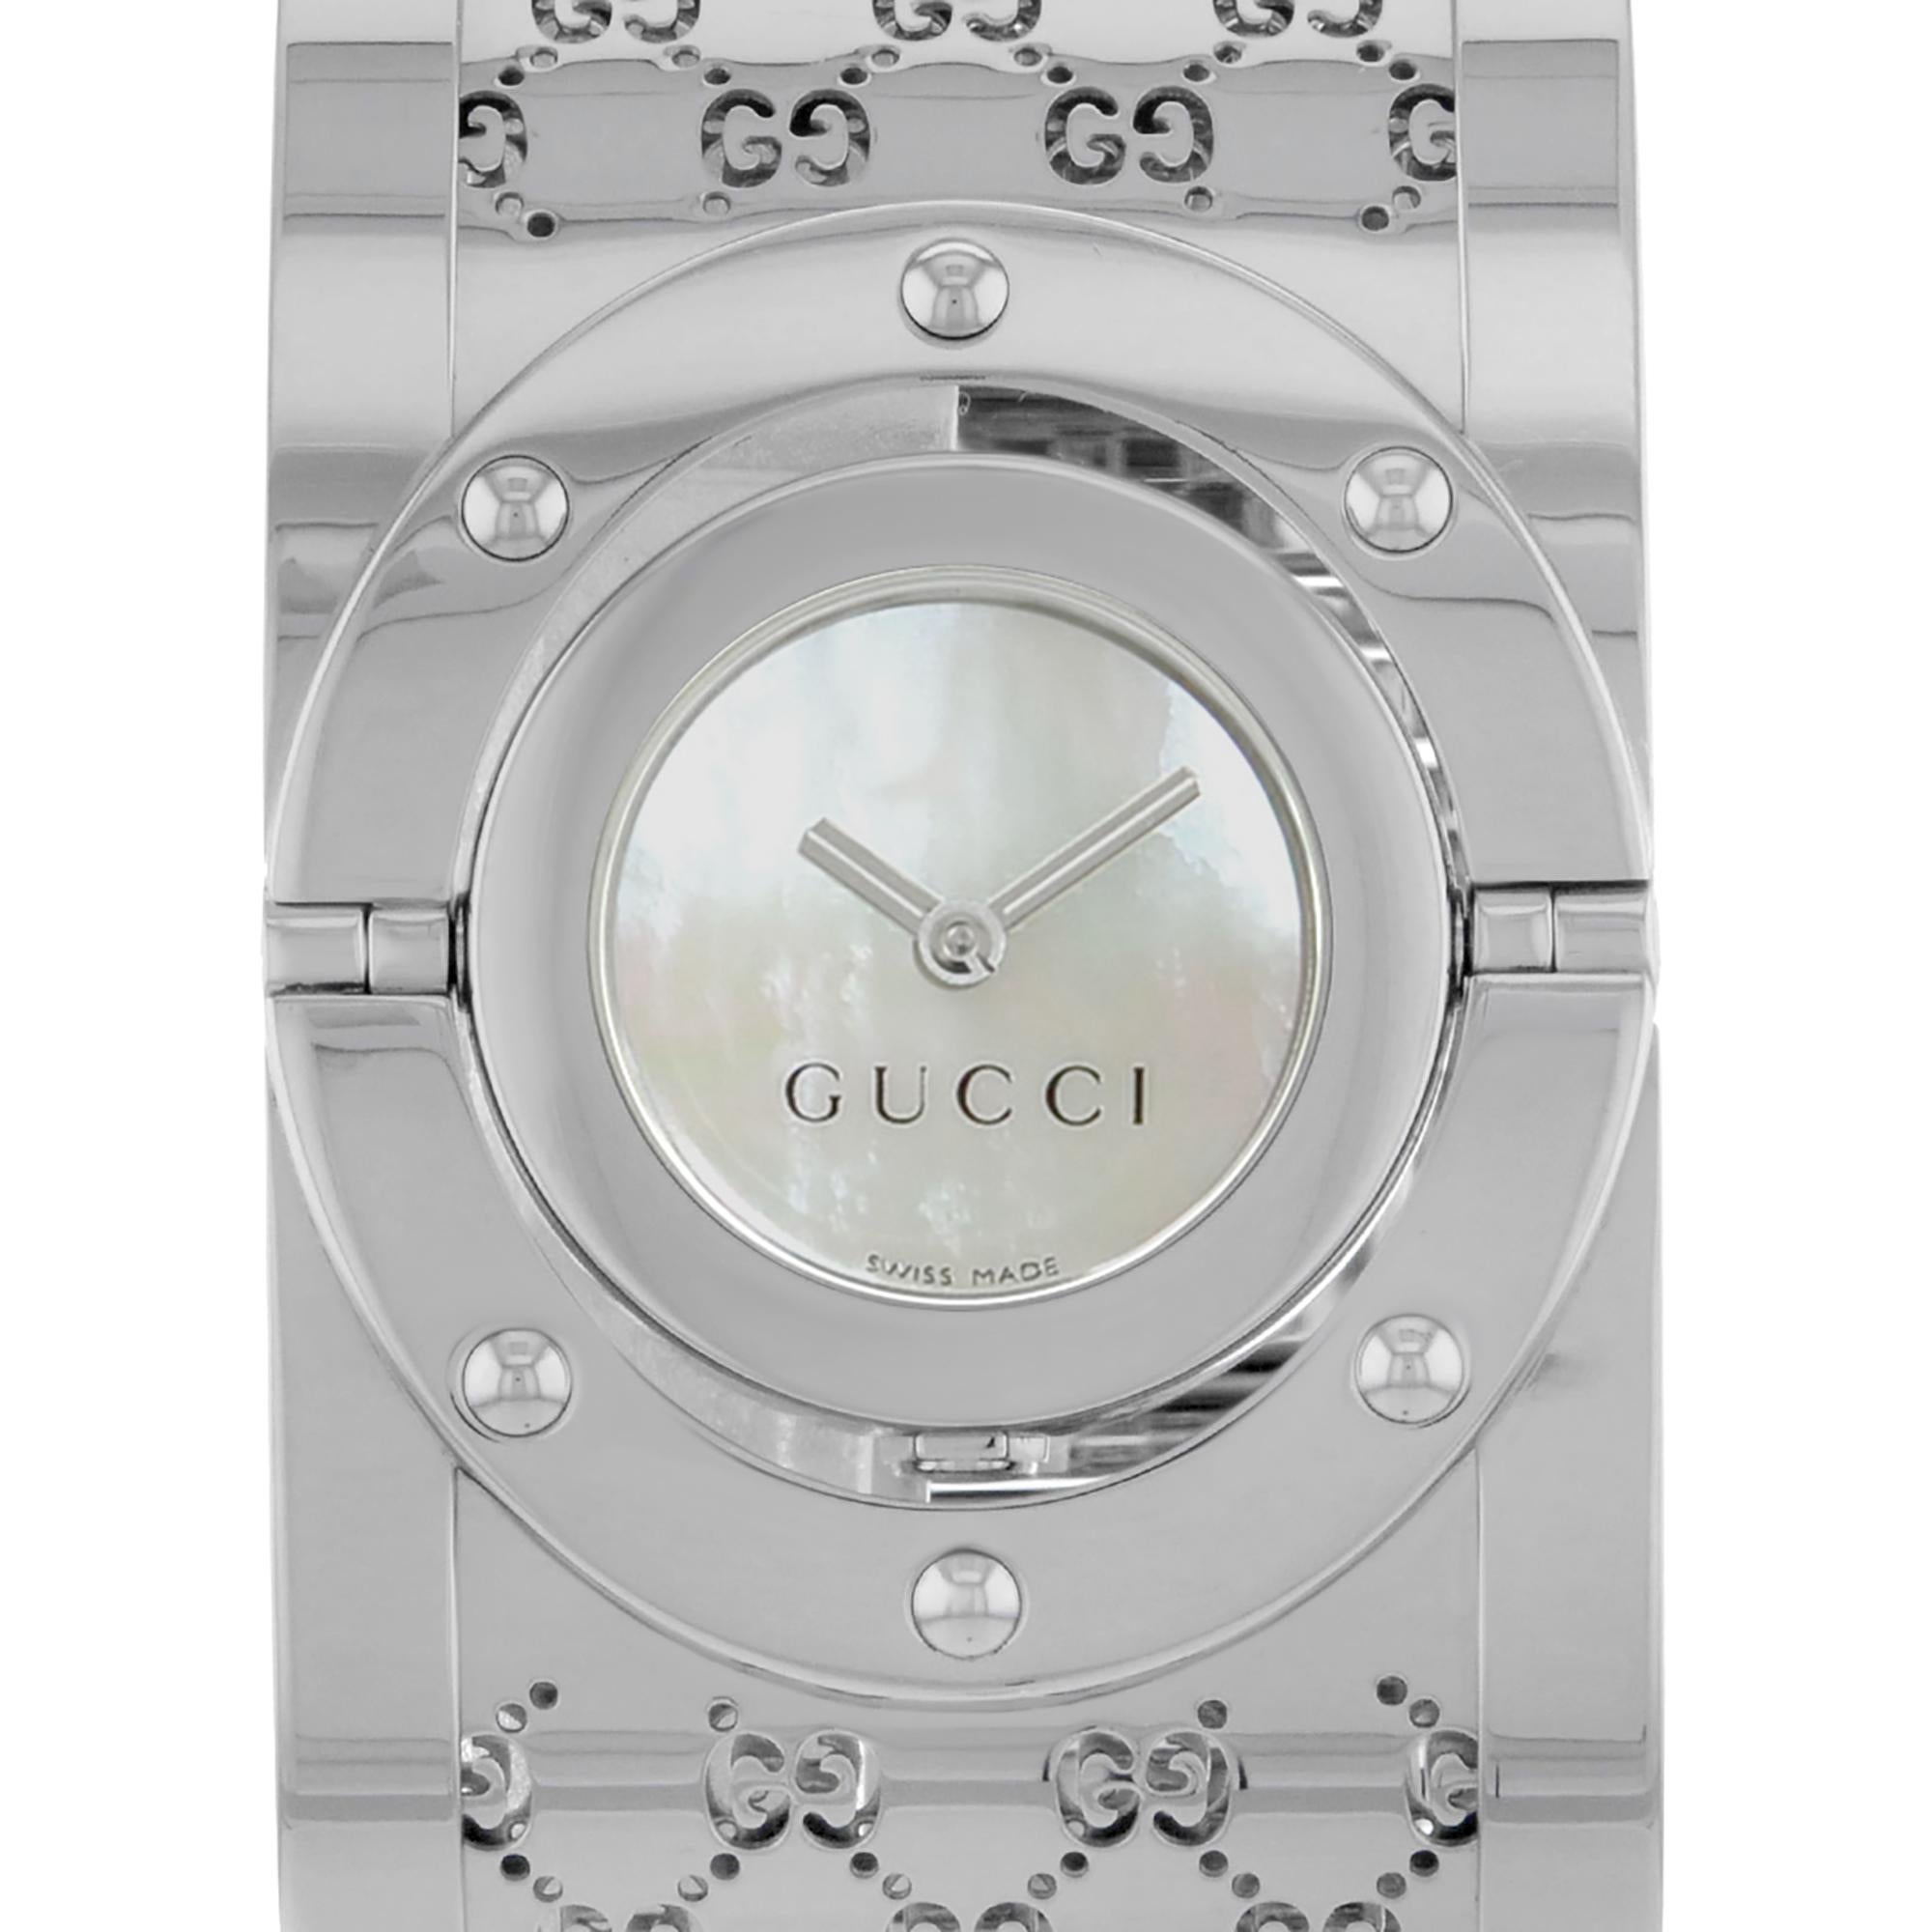 Original Box and Papers are Included. 

 Brand: Gucci  Department: Women  Model Number: YA112413  Country/Region of Manufacture: Switzerland  Model: Gucci Series 112  Style: Dress/Formal  Band Color: Steel  Dial Color: White Mother Of Pearl  Dial